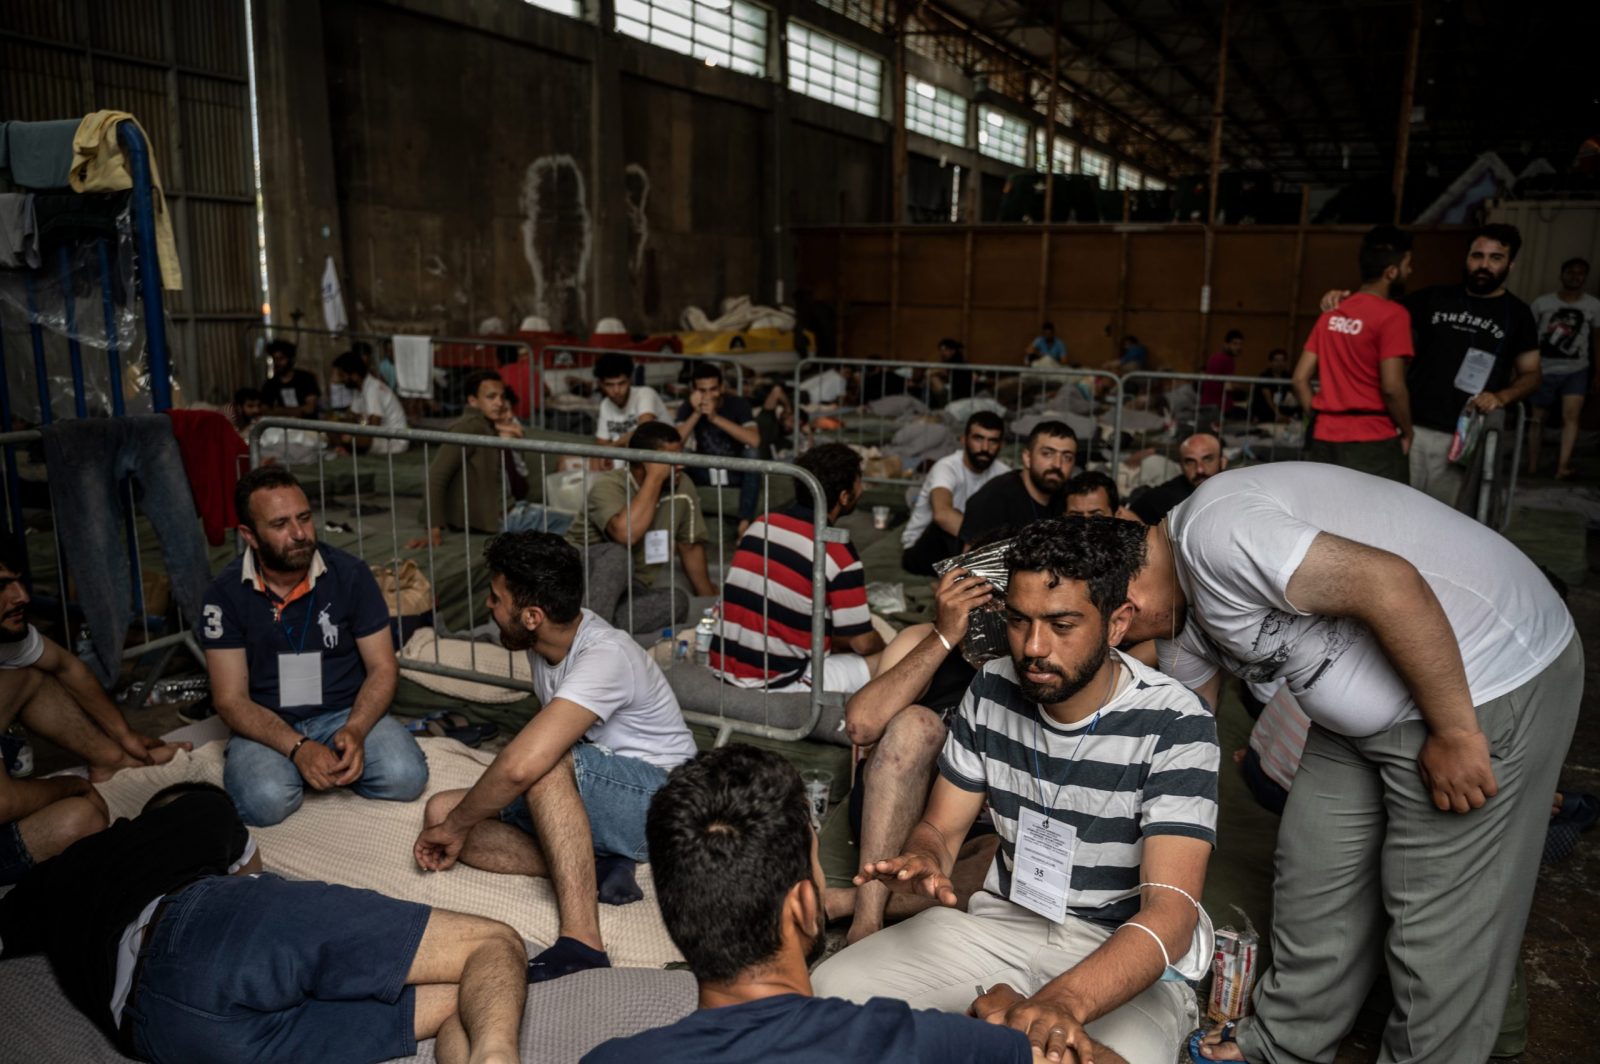 epa10692180 Survivors of a ship sit inside warehouse at the port town, after a boat carrying dozens of migrants sank in international waters in the Ionian Sea, in Kalamata, southwest of Athens, Greece, 15 June 2023. A total of 104 individuals were rescued, while 79 bodies were recovered, after a fishing boat capsized in international waters some 47 nautical miles southwest of the Peloponnese coast and the town of Pylos.  EPA/Angelos Tzortzinis / POOL HUNGARY OUT